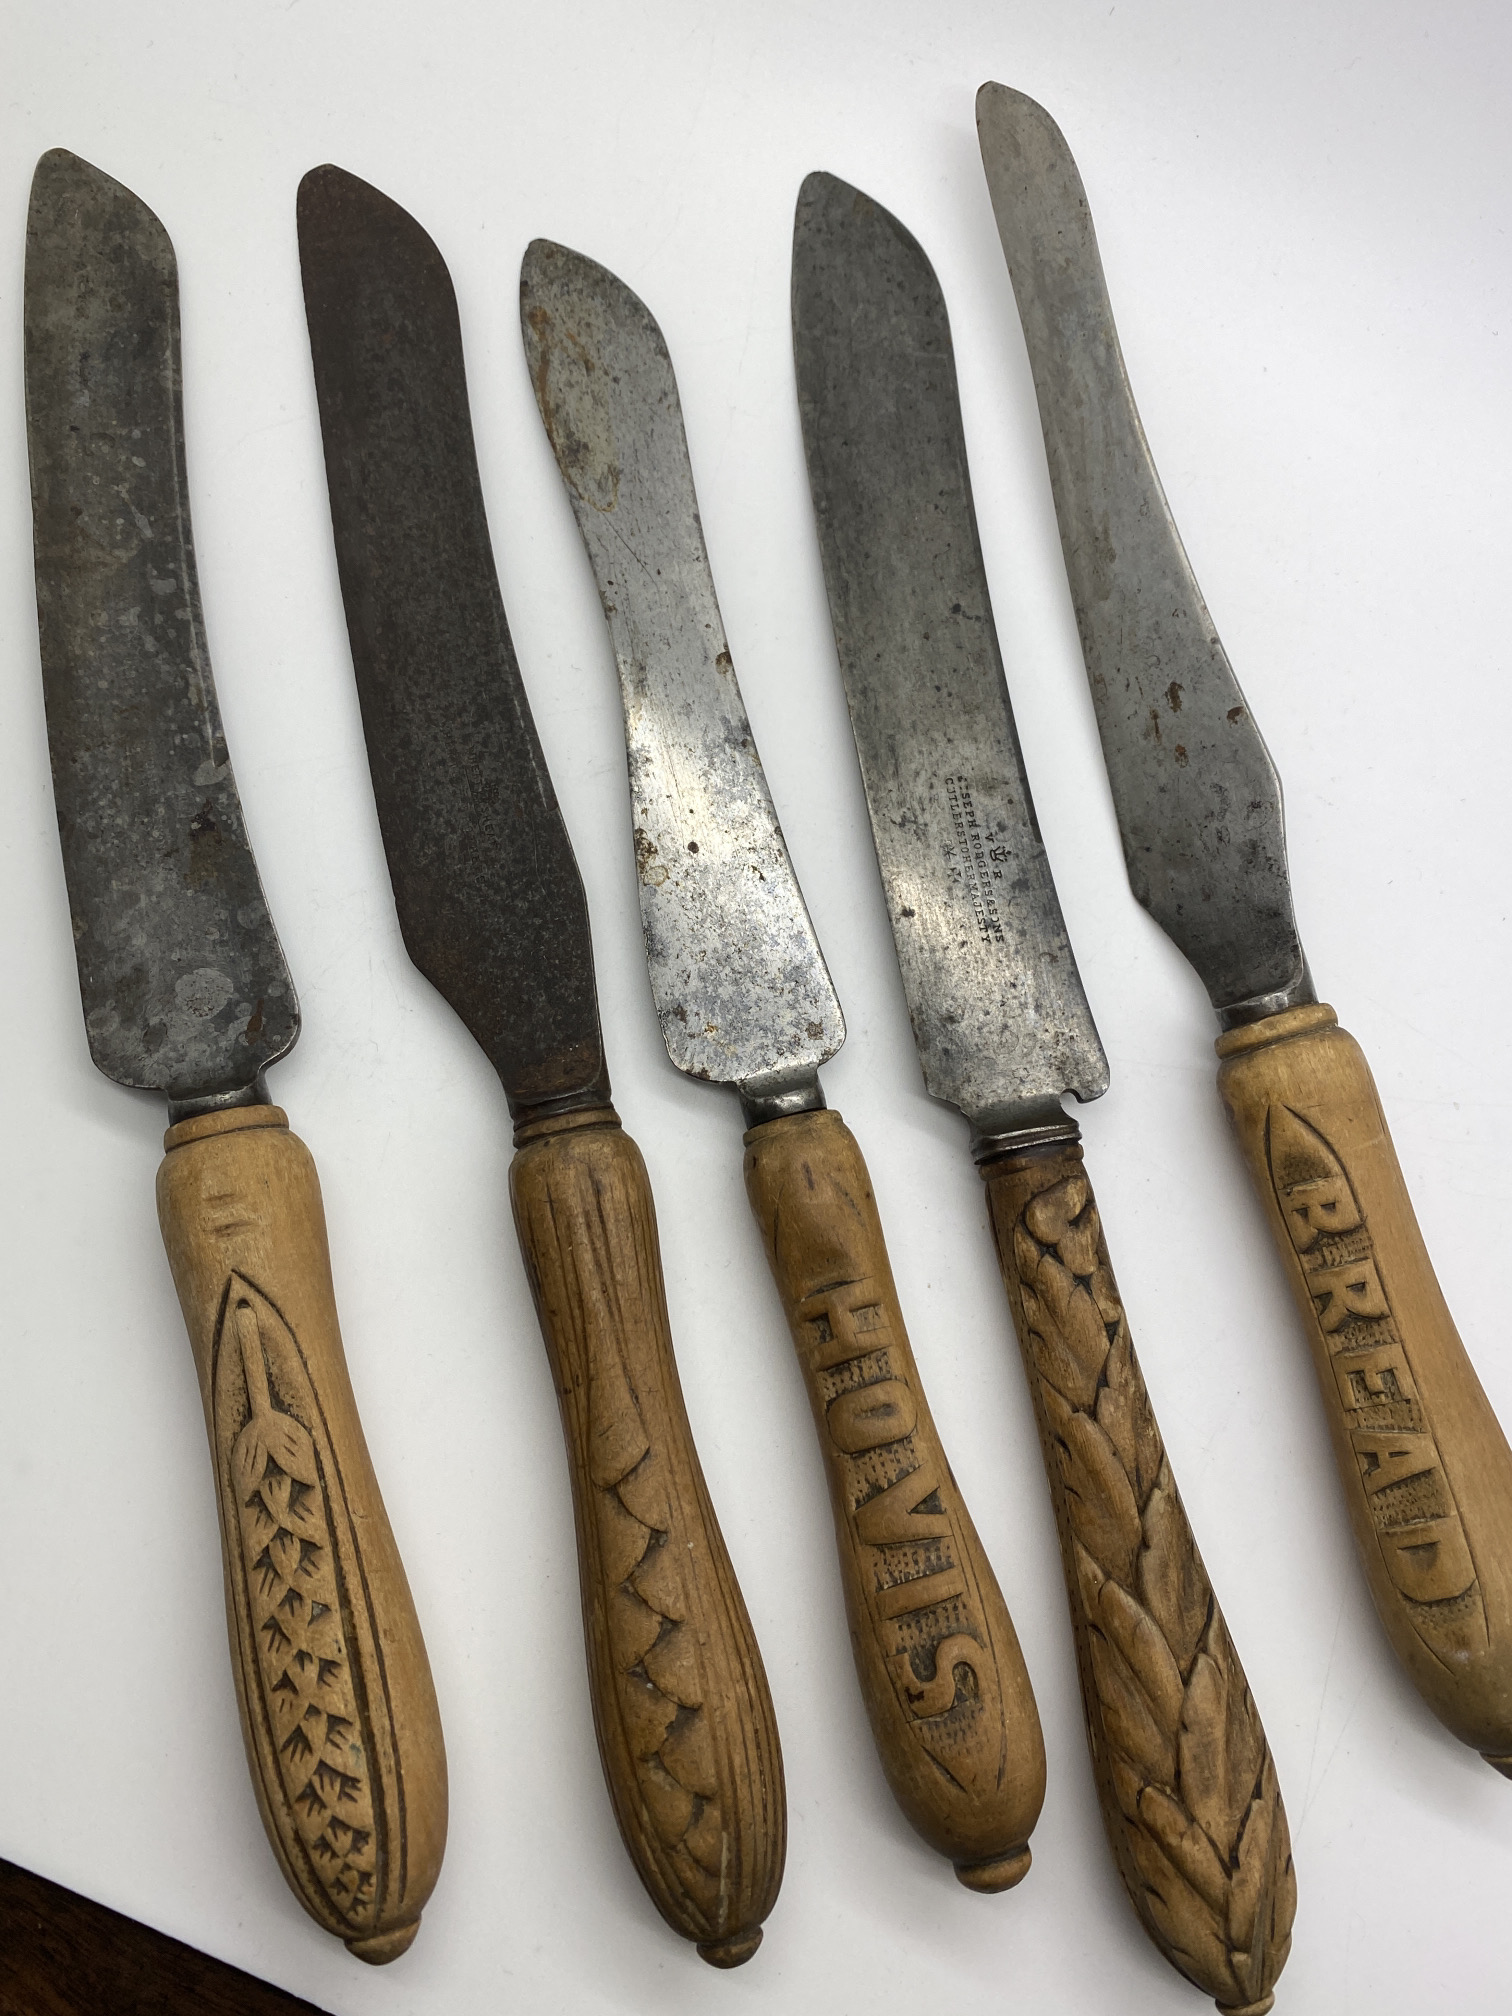 5 x ANTIQUE 1930's BREAD KNIVES INCLUDING HOVIS & BREAD - INC JOSEPH RODGERS - WHEAT SHEAF ETC - Image 2 of 14